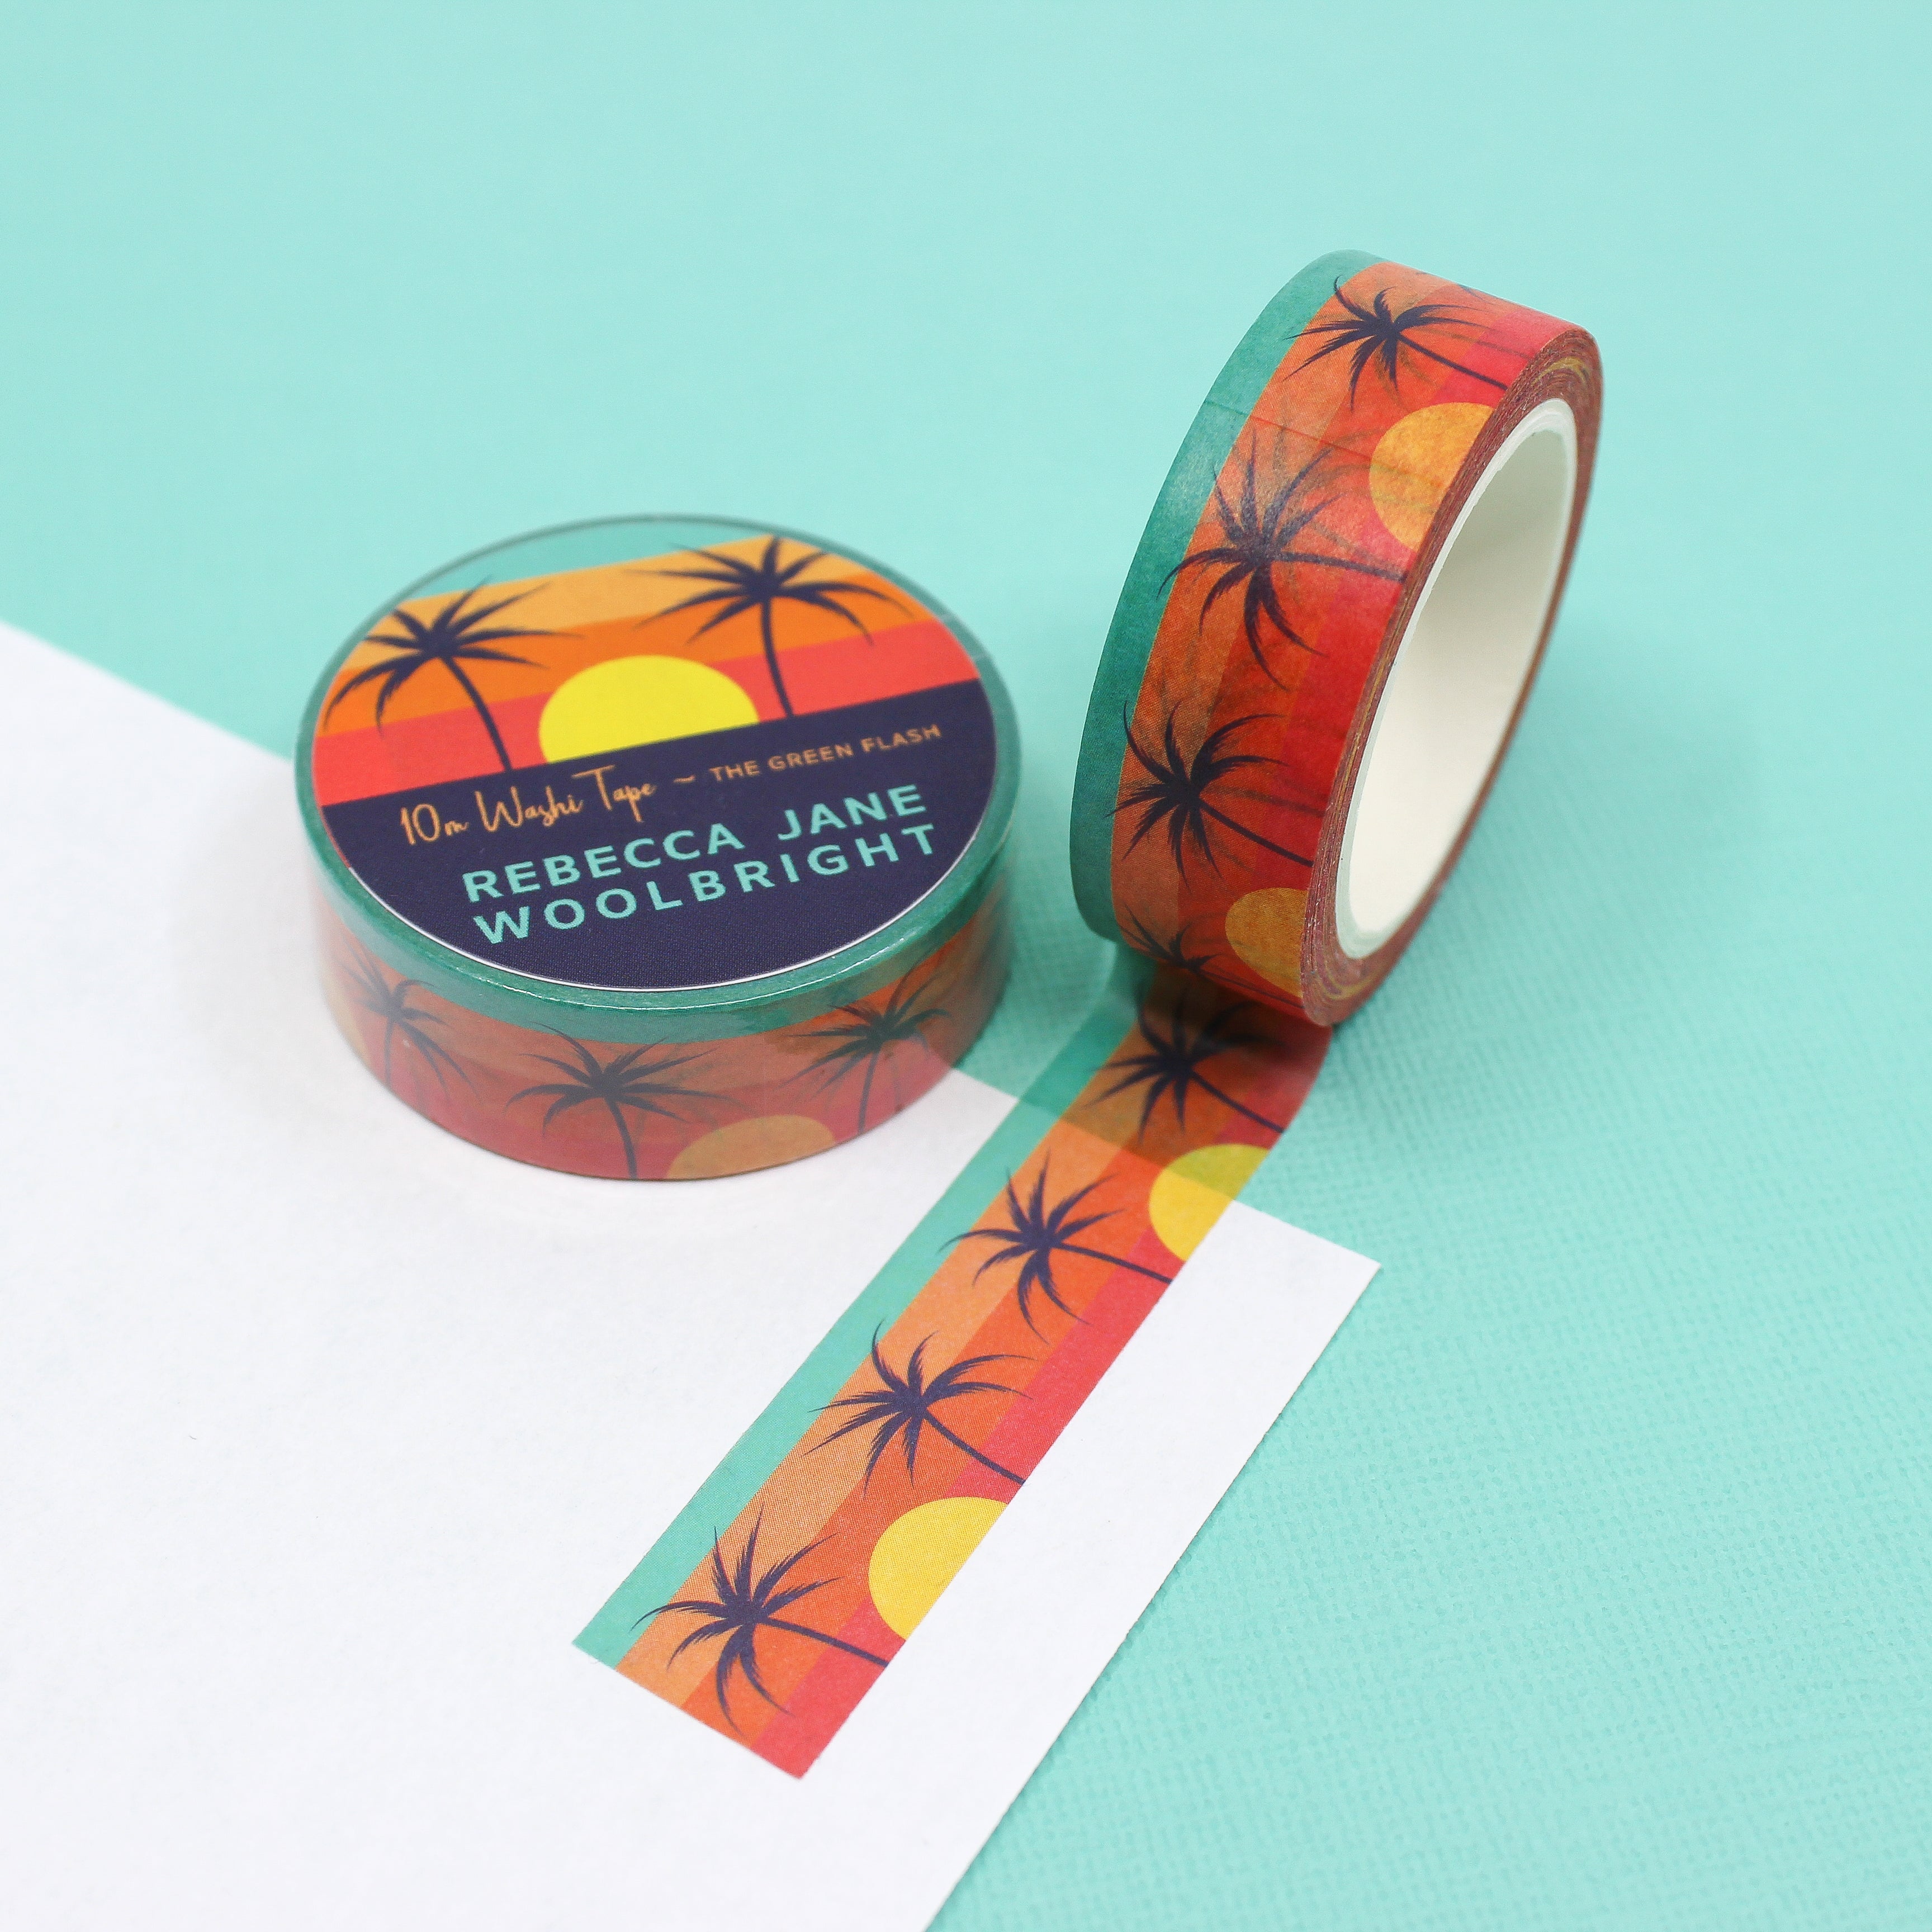 This is a pretty sunset view themed washi tape from BBB Supplies Craft Shop